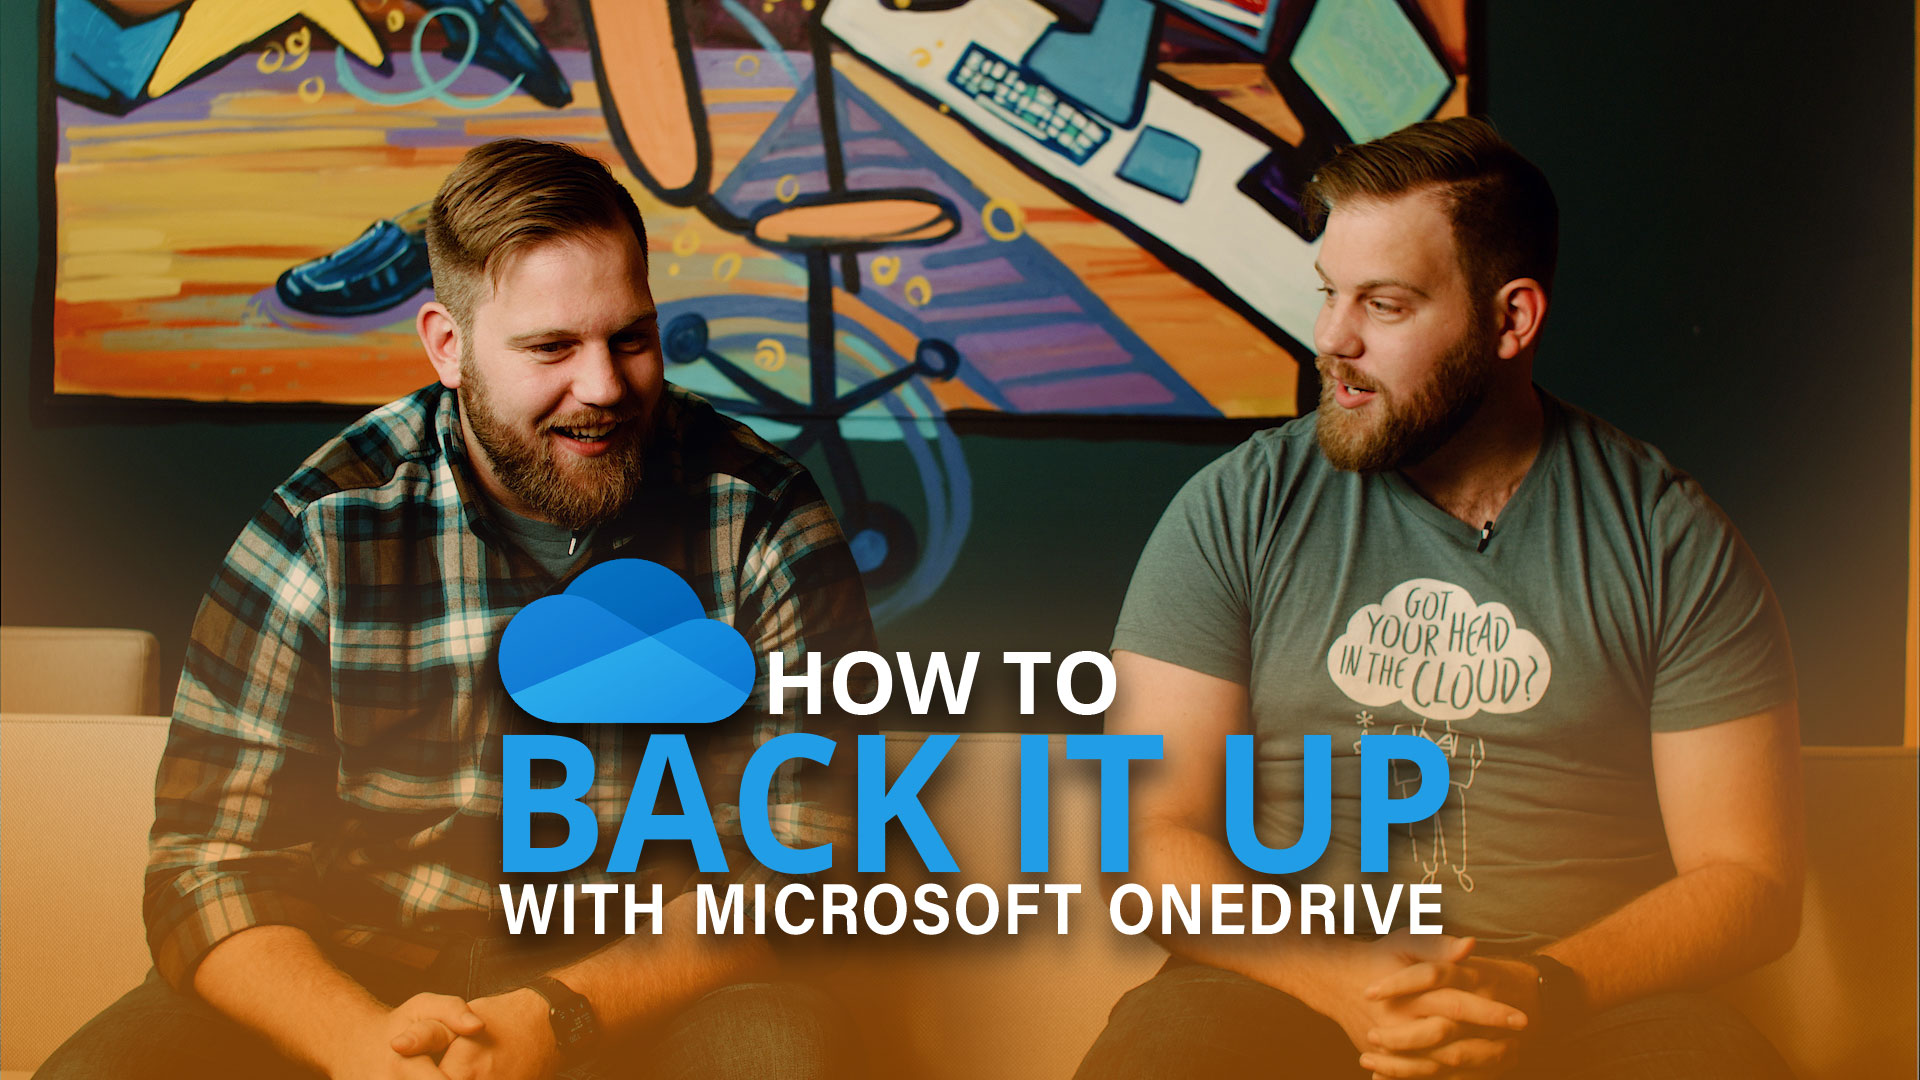 How to Back It Up with Microsoft OneDrive